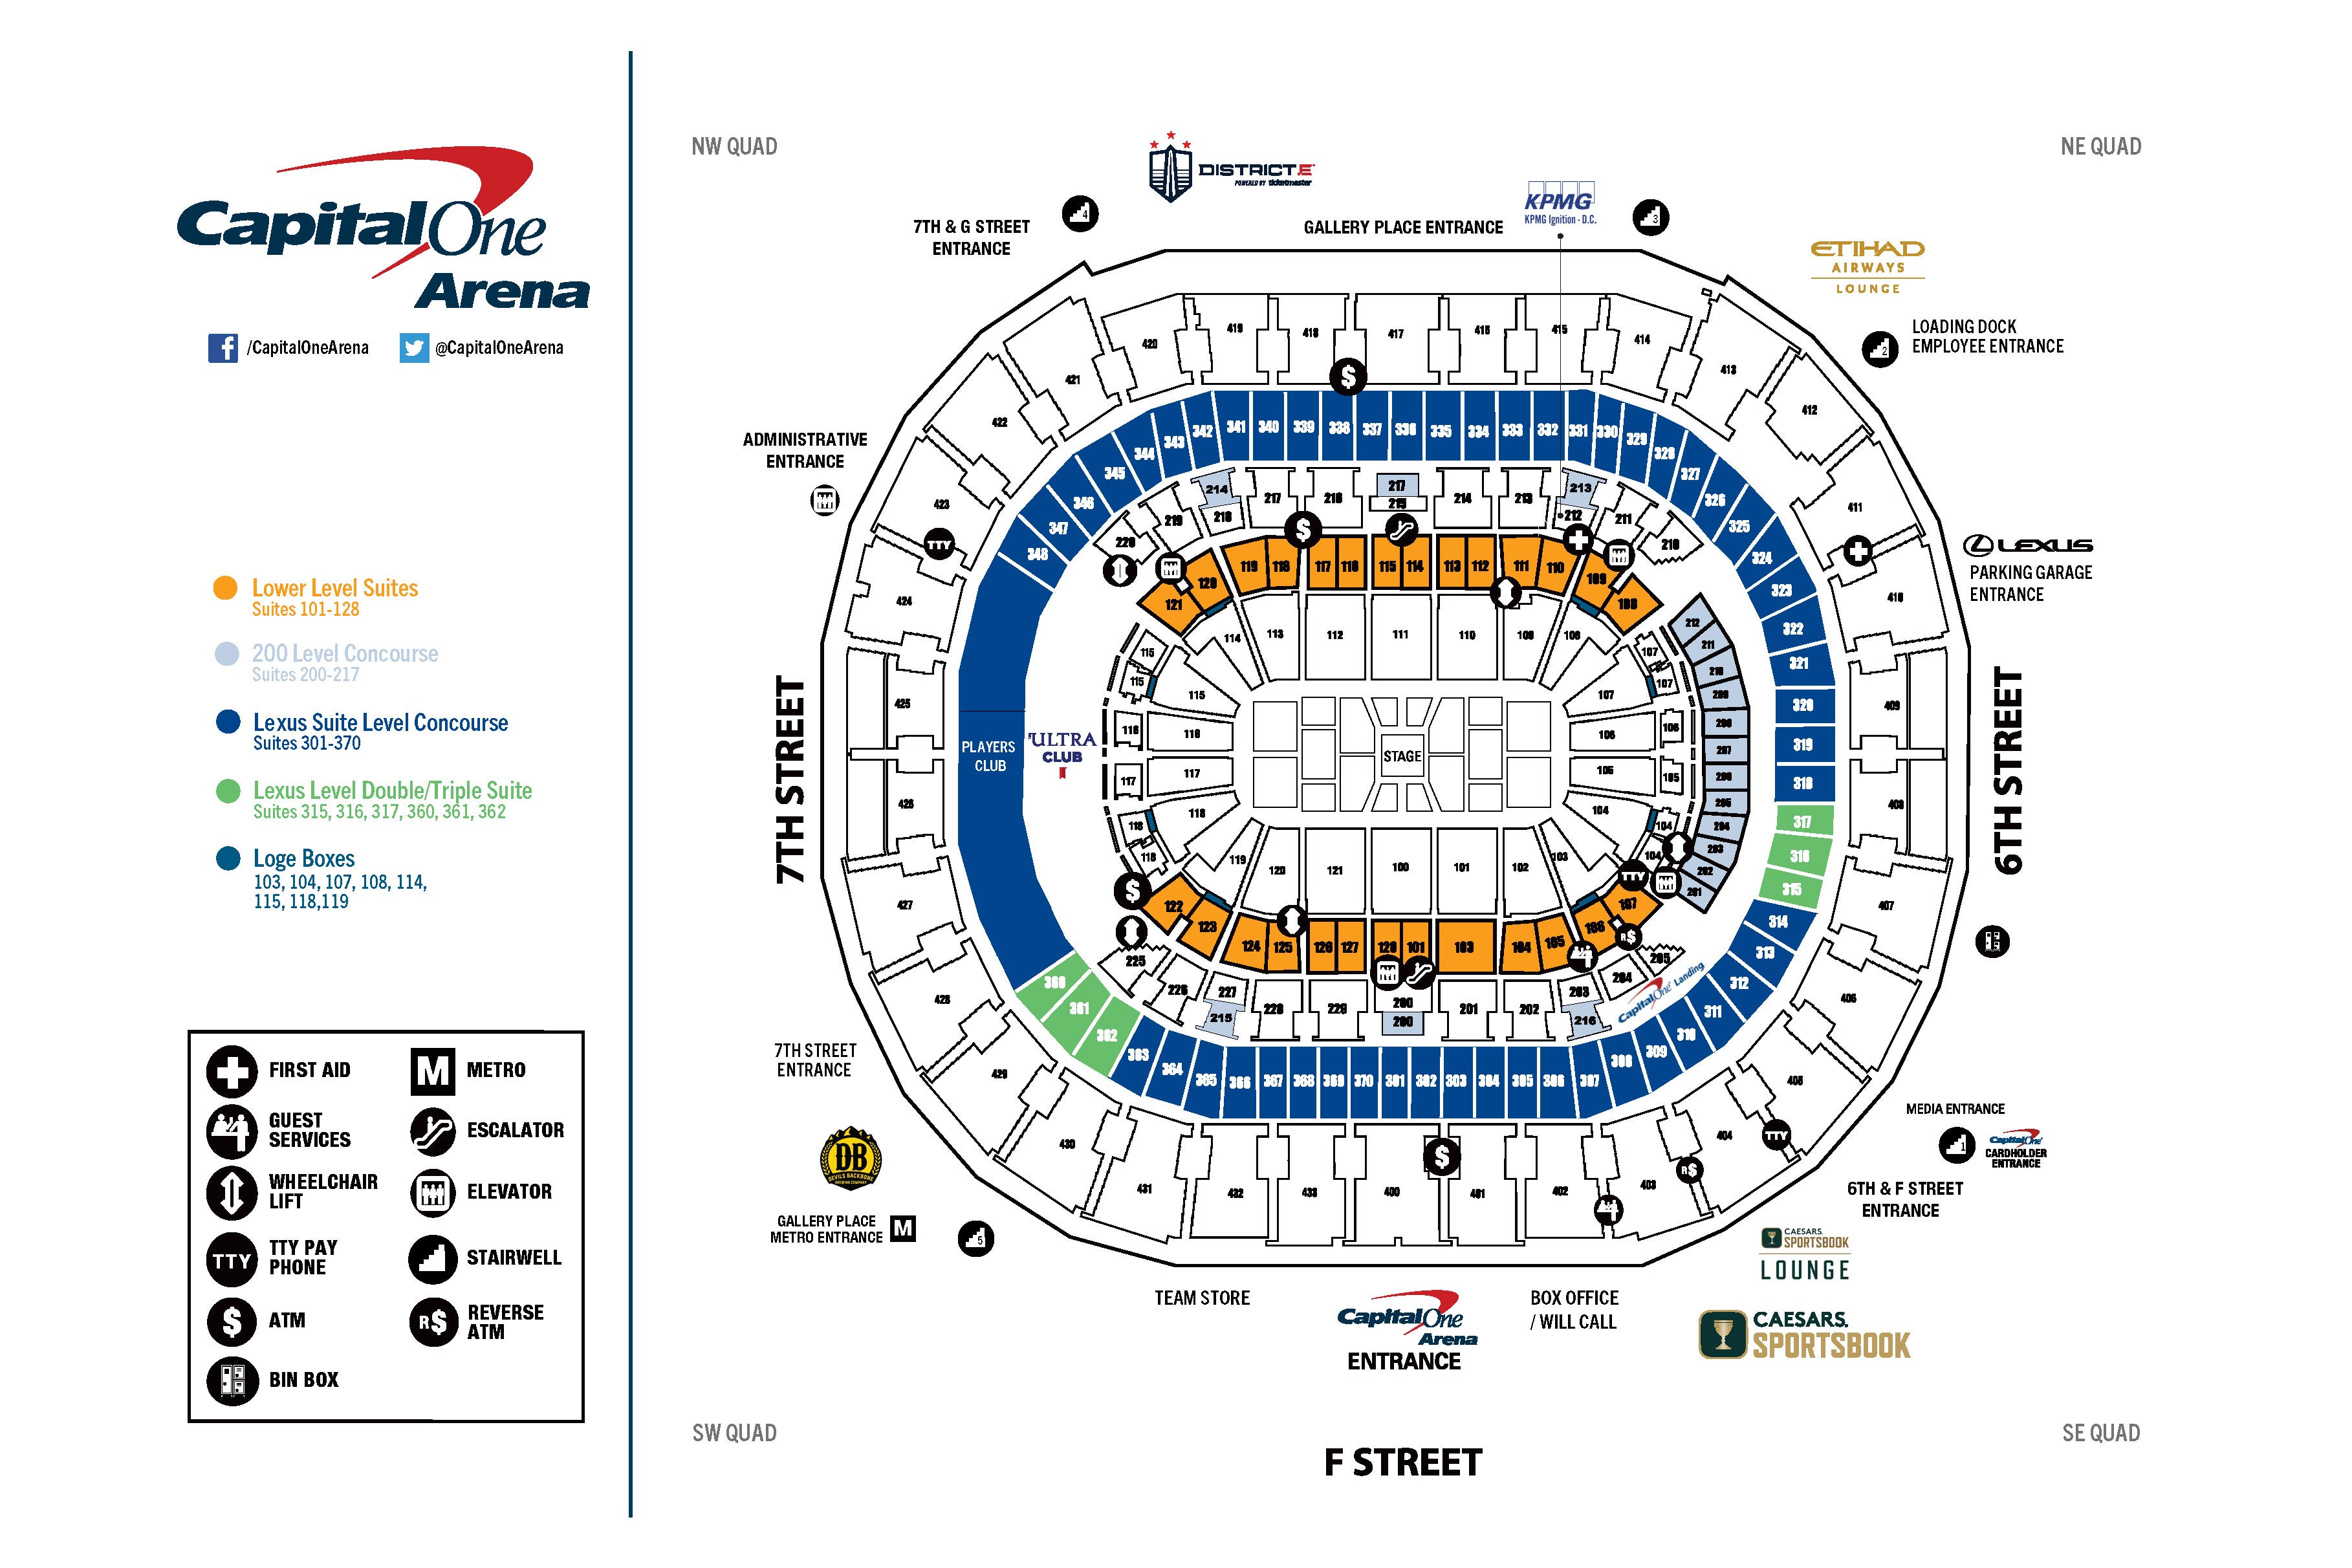 Seating Charts | Capital One Arena